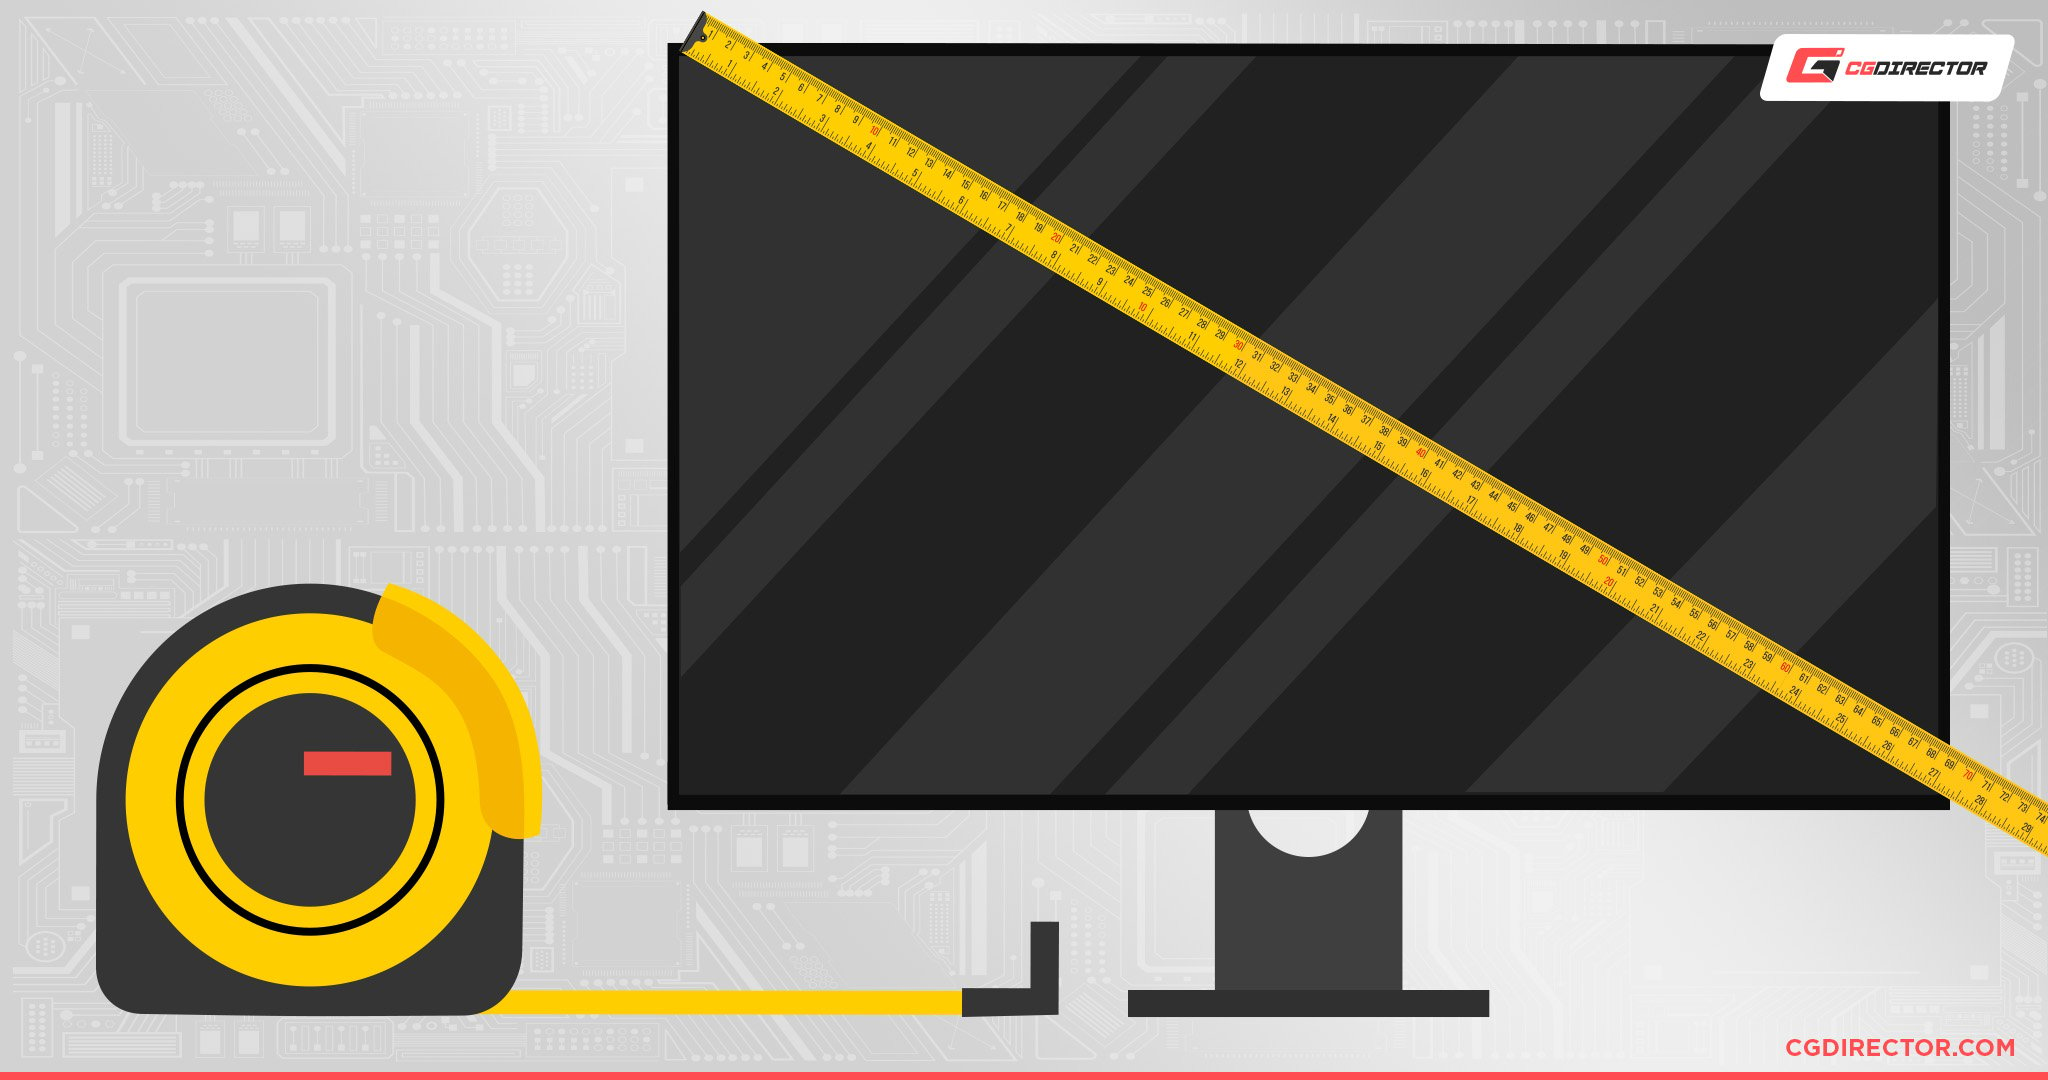 How to Measure your Monitor - Tape Measure